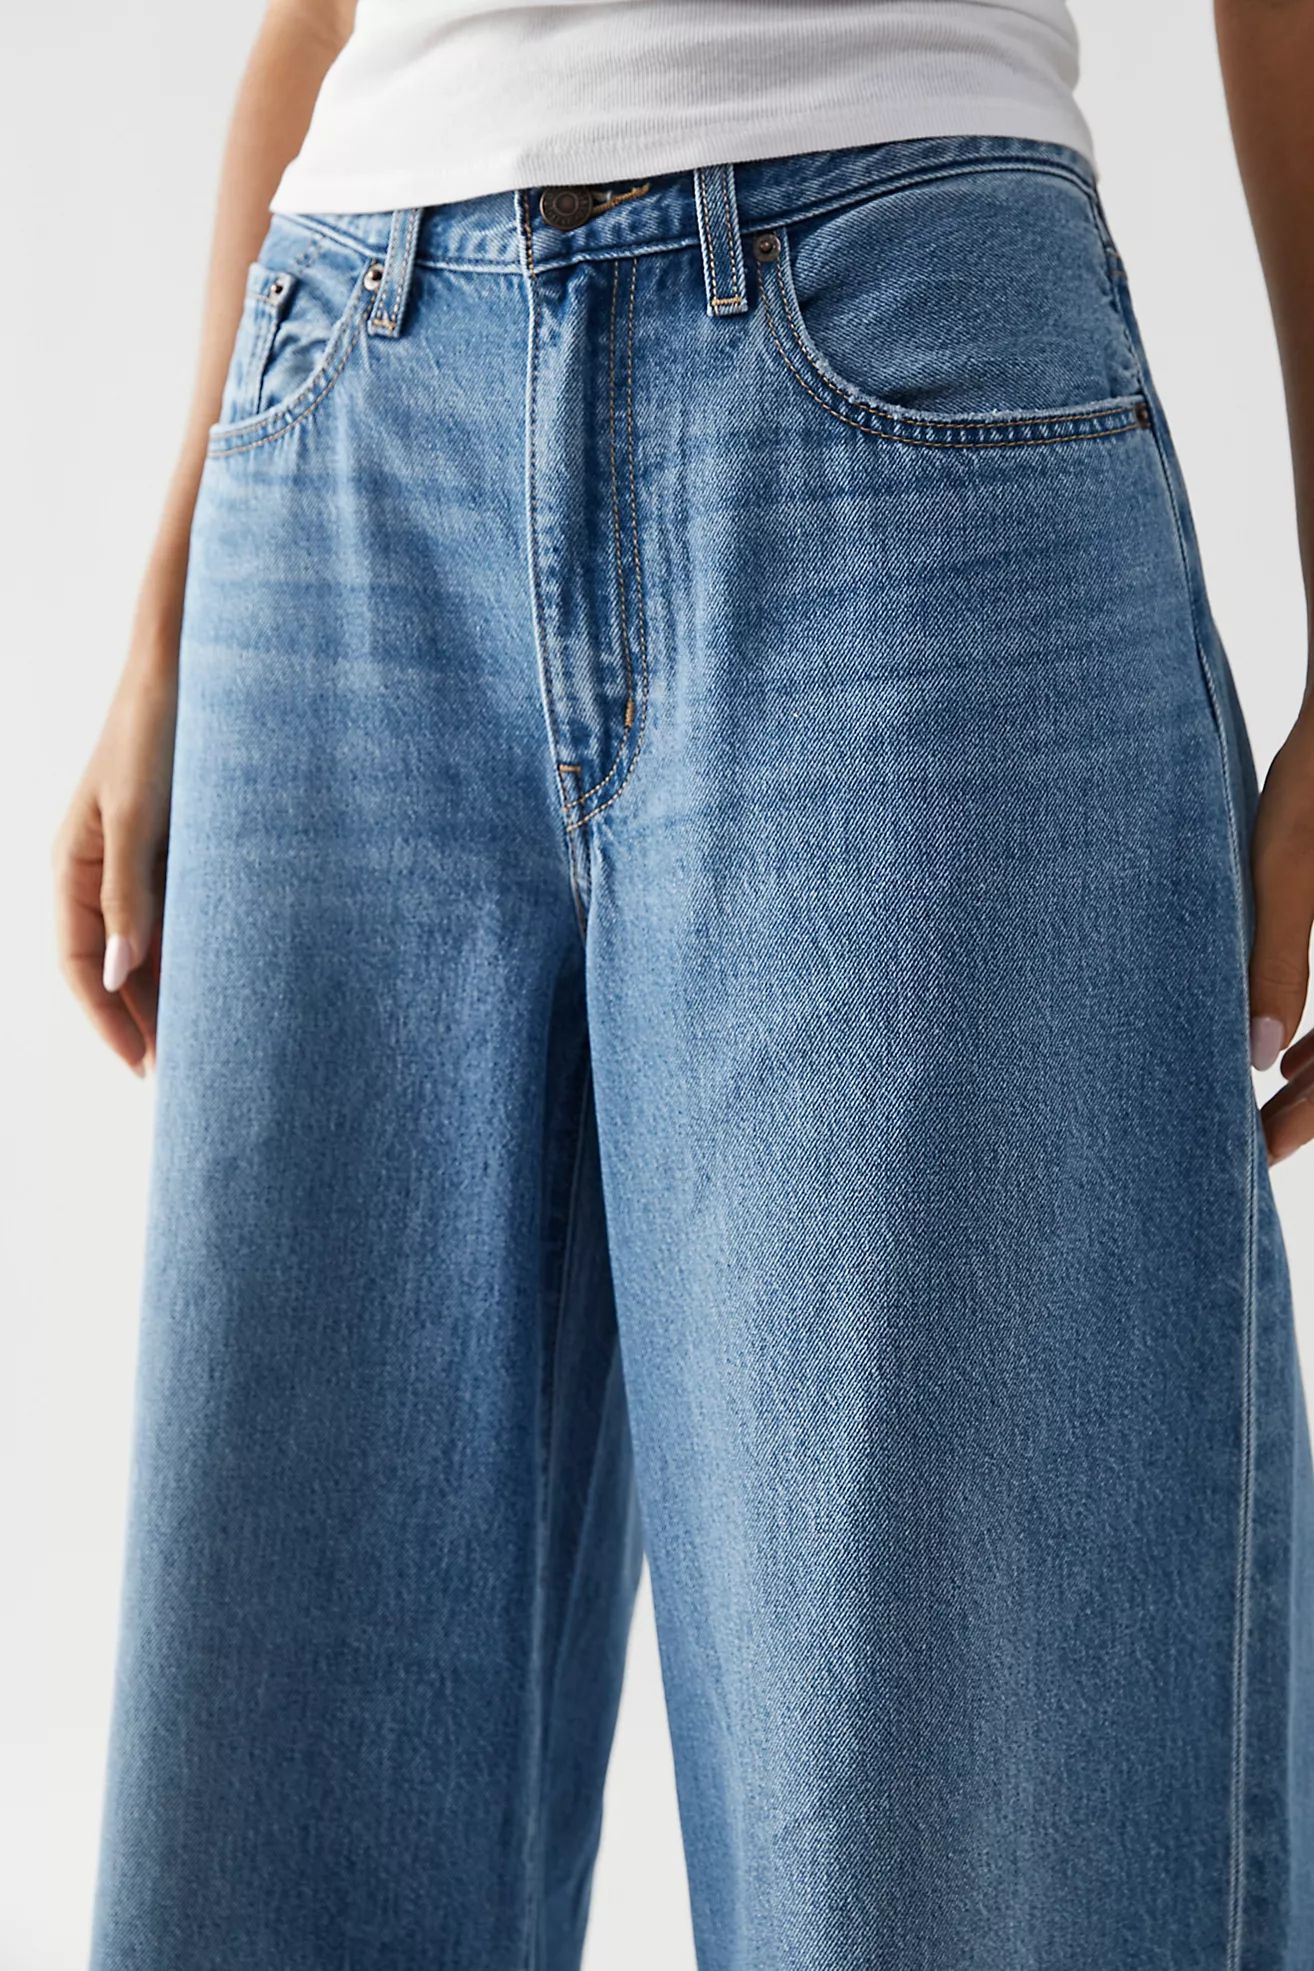 Levi's XL Flood Jeans | Free People (Global - UK&FR Excluded)